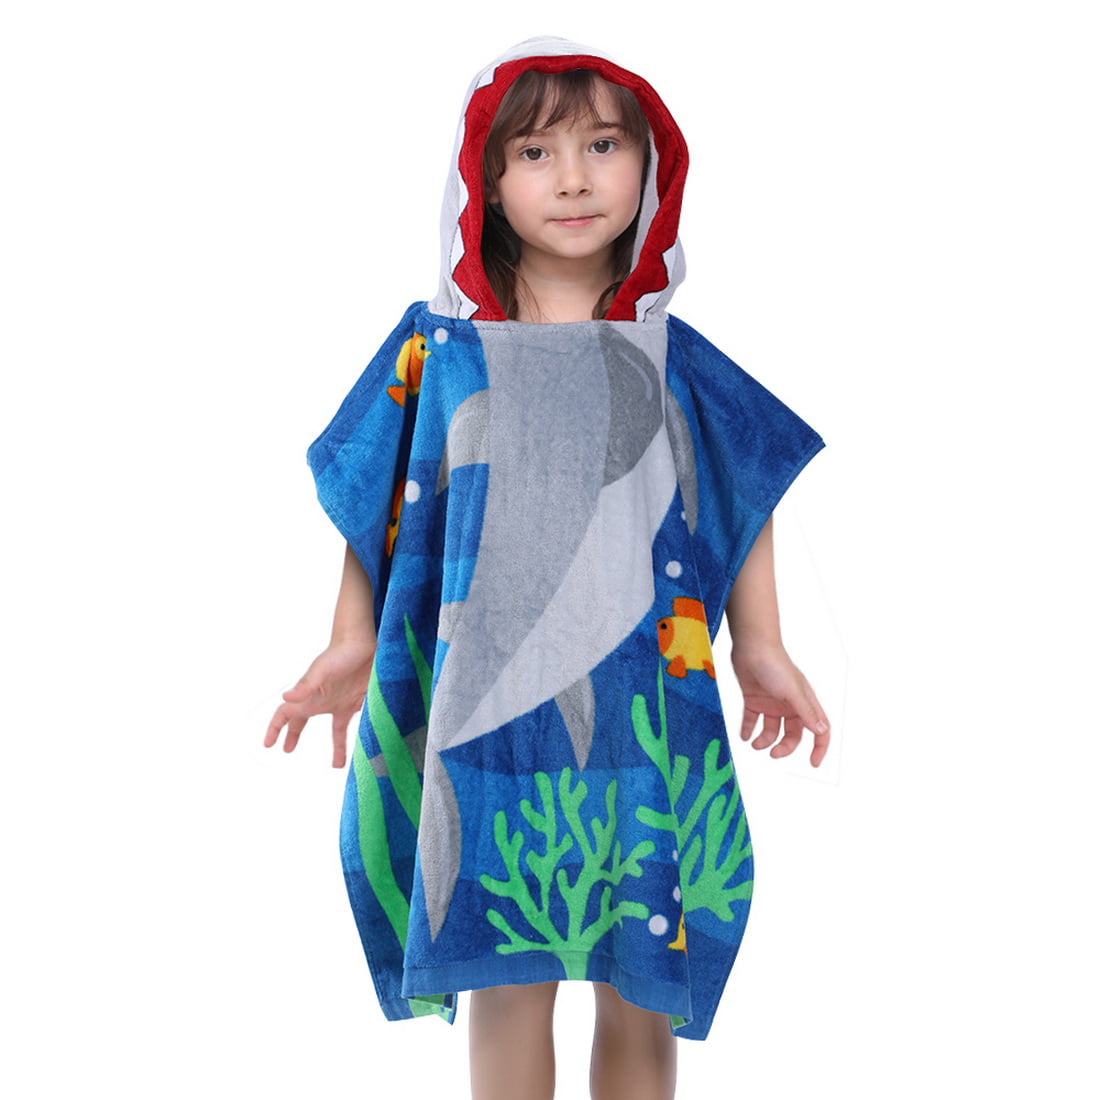 Official 3D Character Cotton Poncho Bath Beach Swimming Hooded Towel Boys Girls 